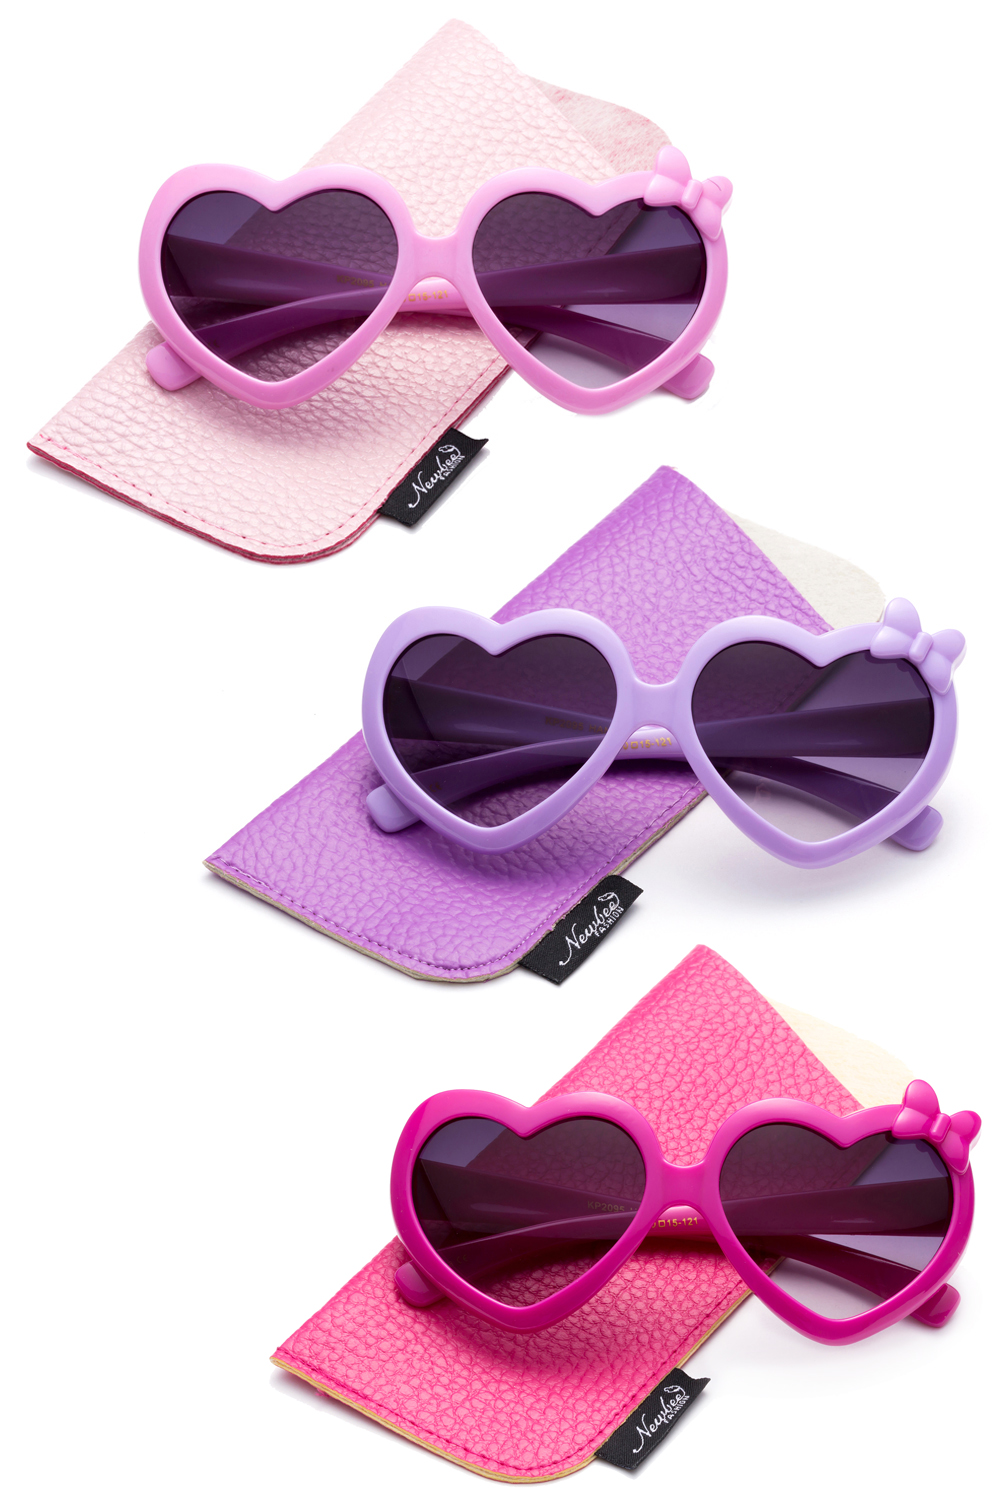 Newbee Fashion- Girls Heart Sunglasses with Bow Cute Heart Shaped Sunglasses for Girls Fashion Sunglasses UV Protection w/Carrying Pouch - image 1 of 3